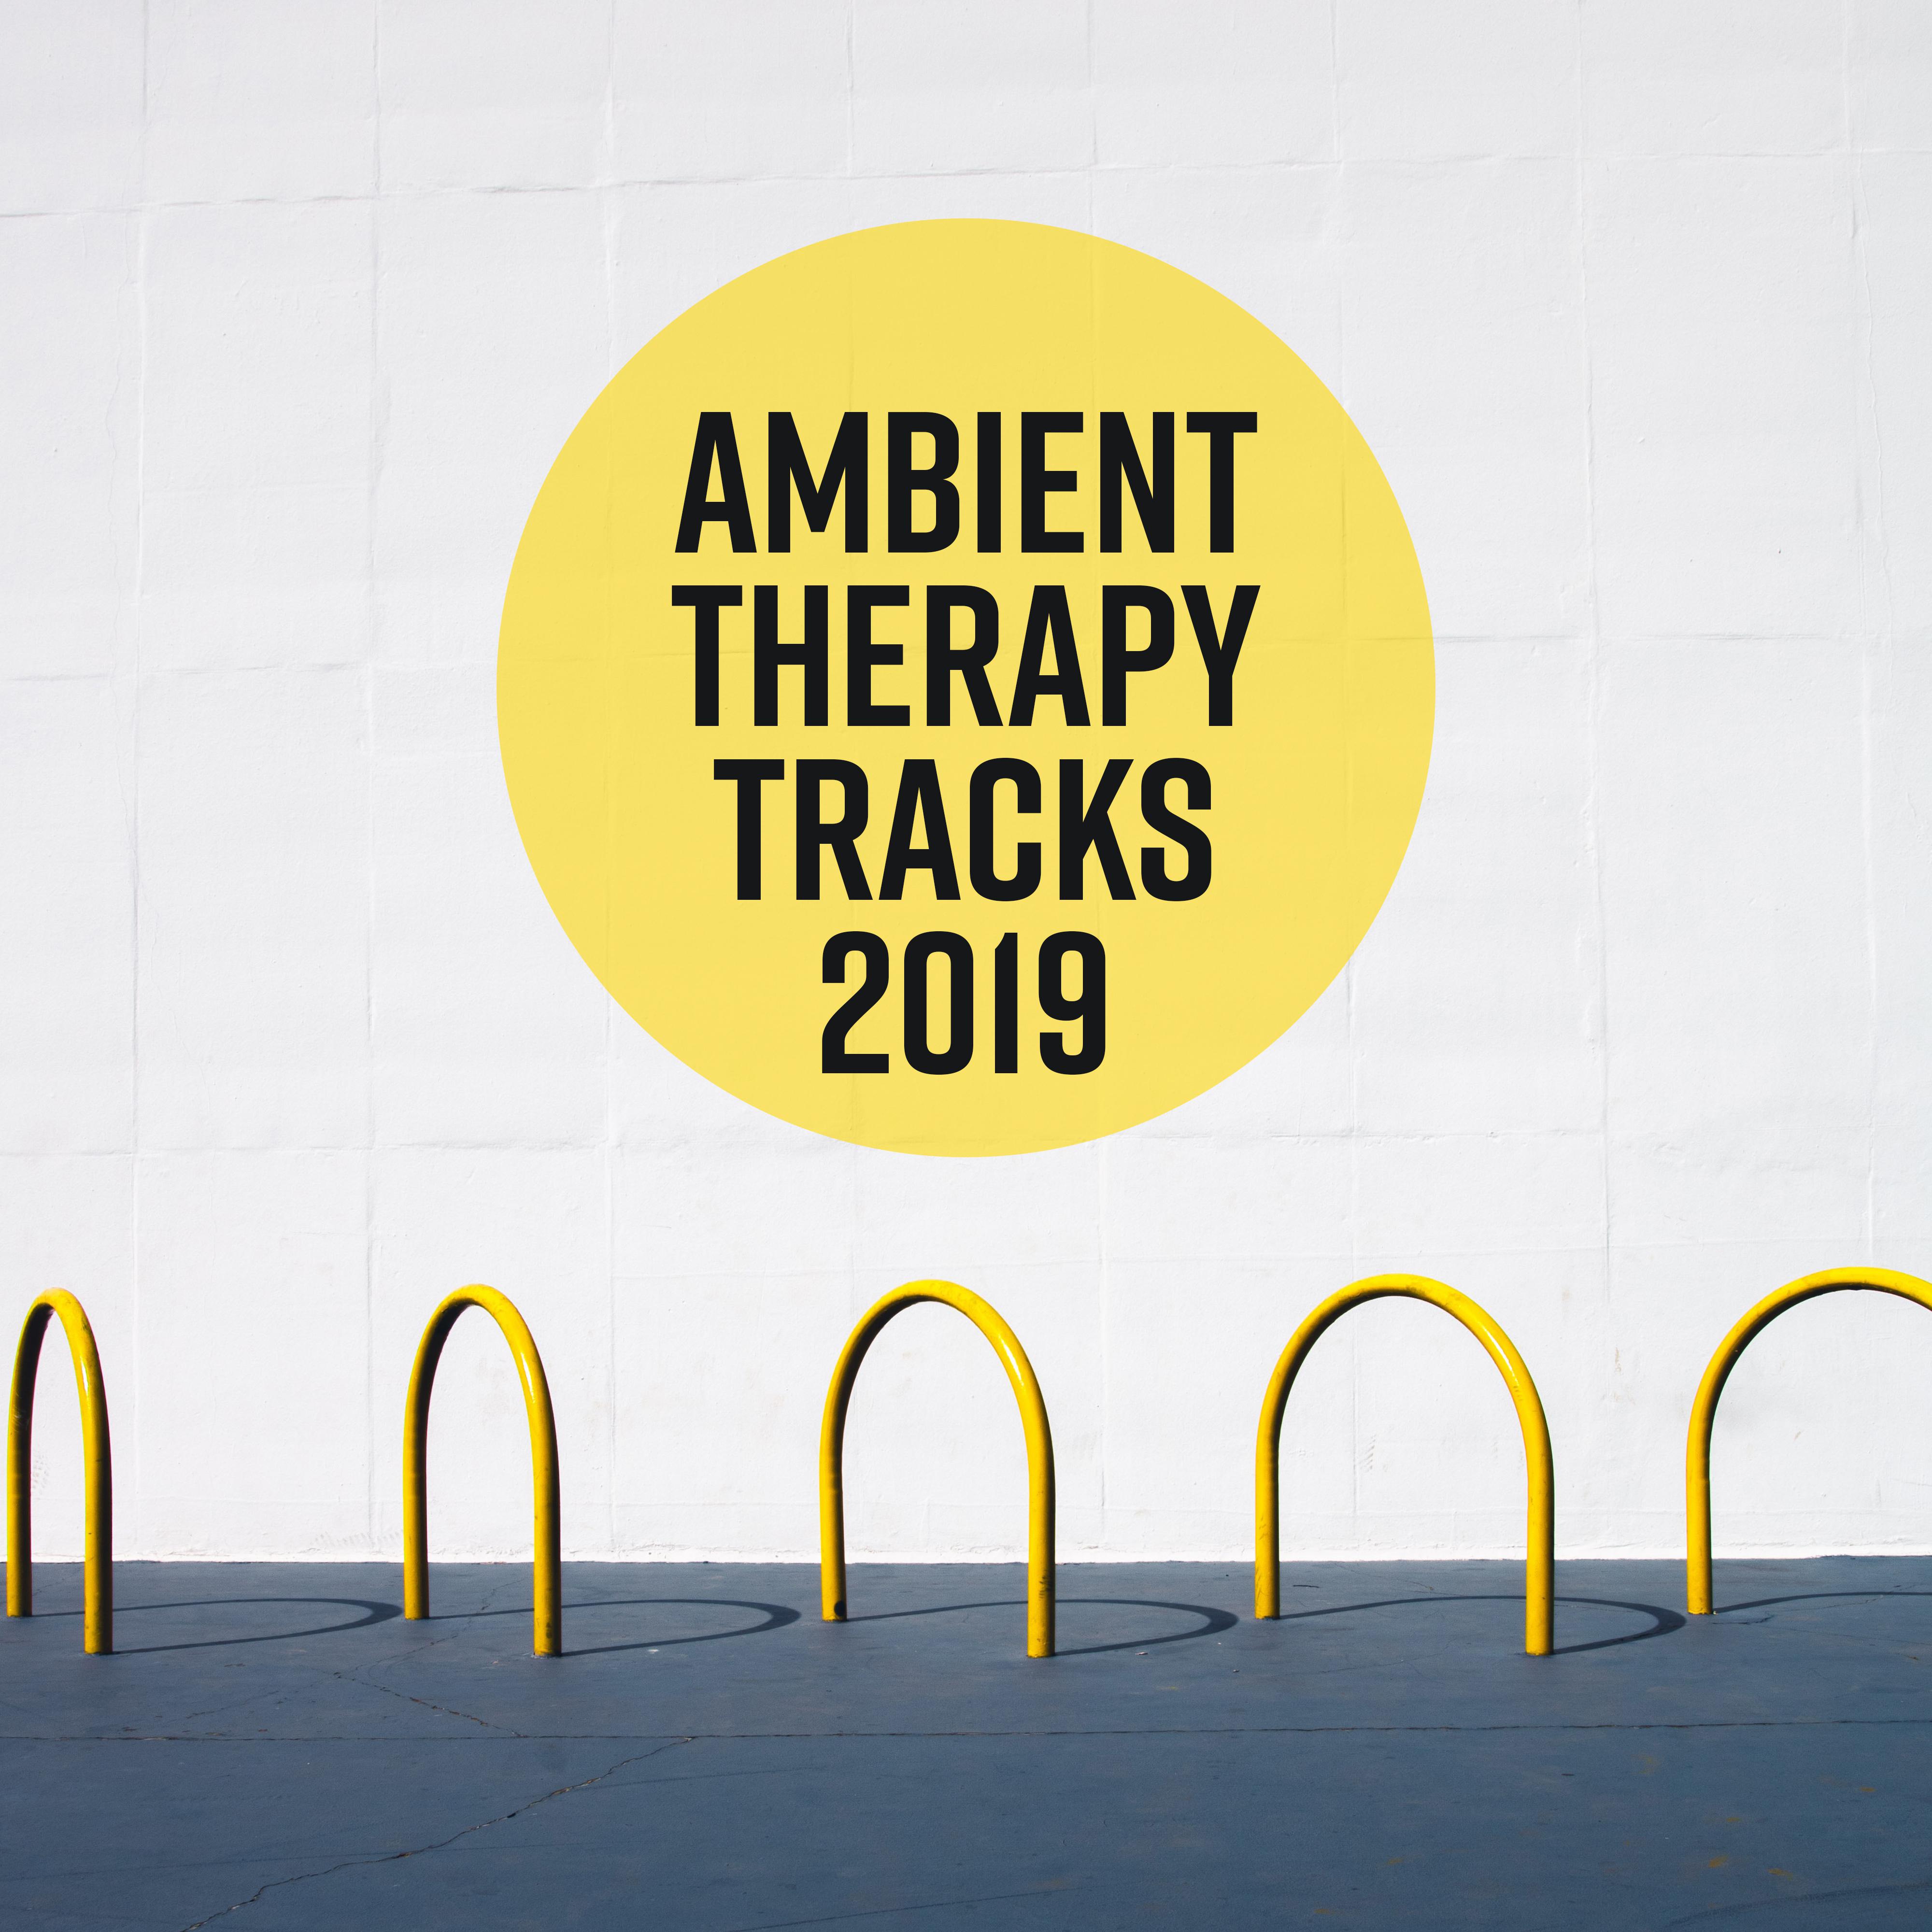 Ambient Therapy Tracks 2019